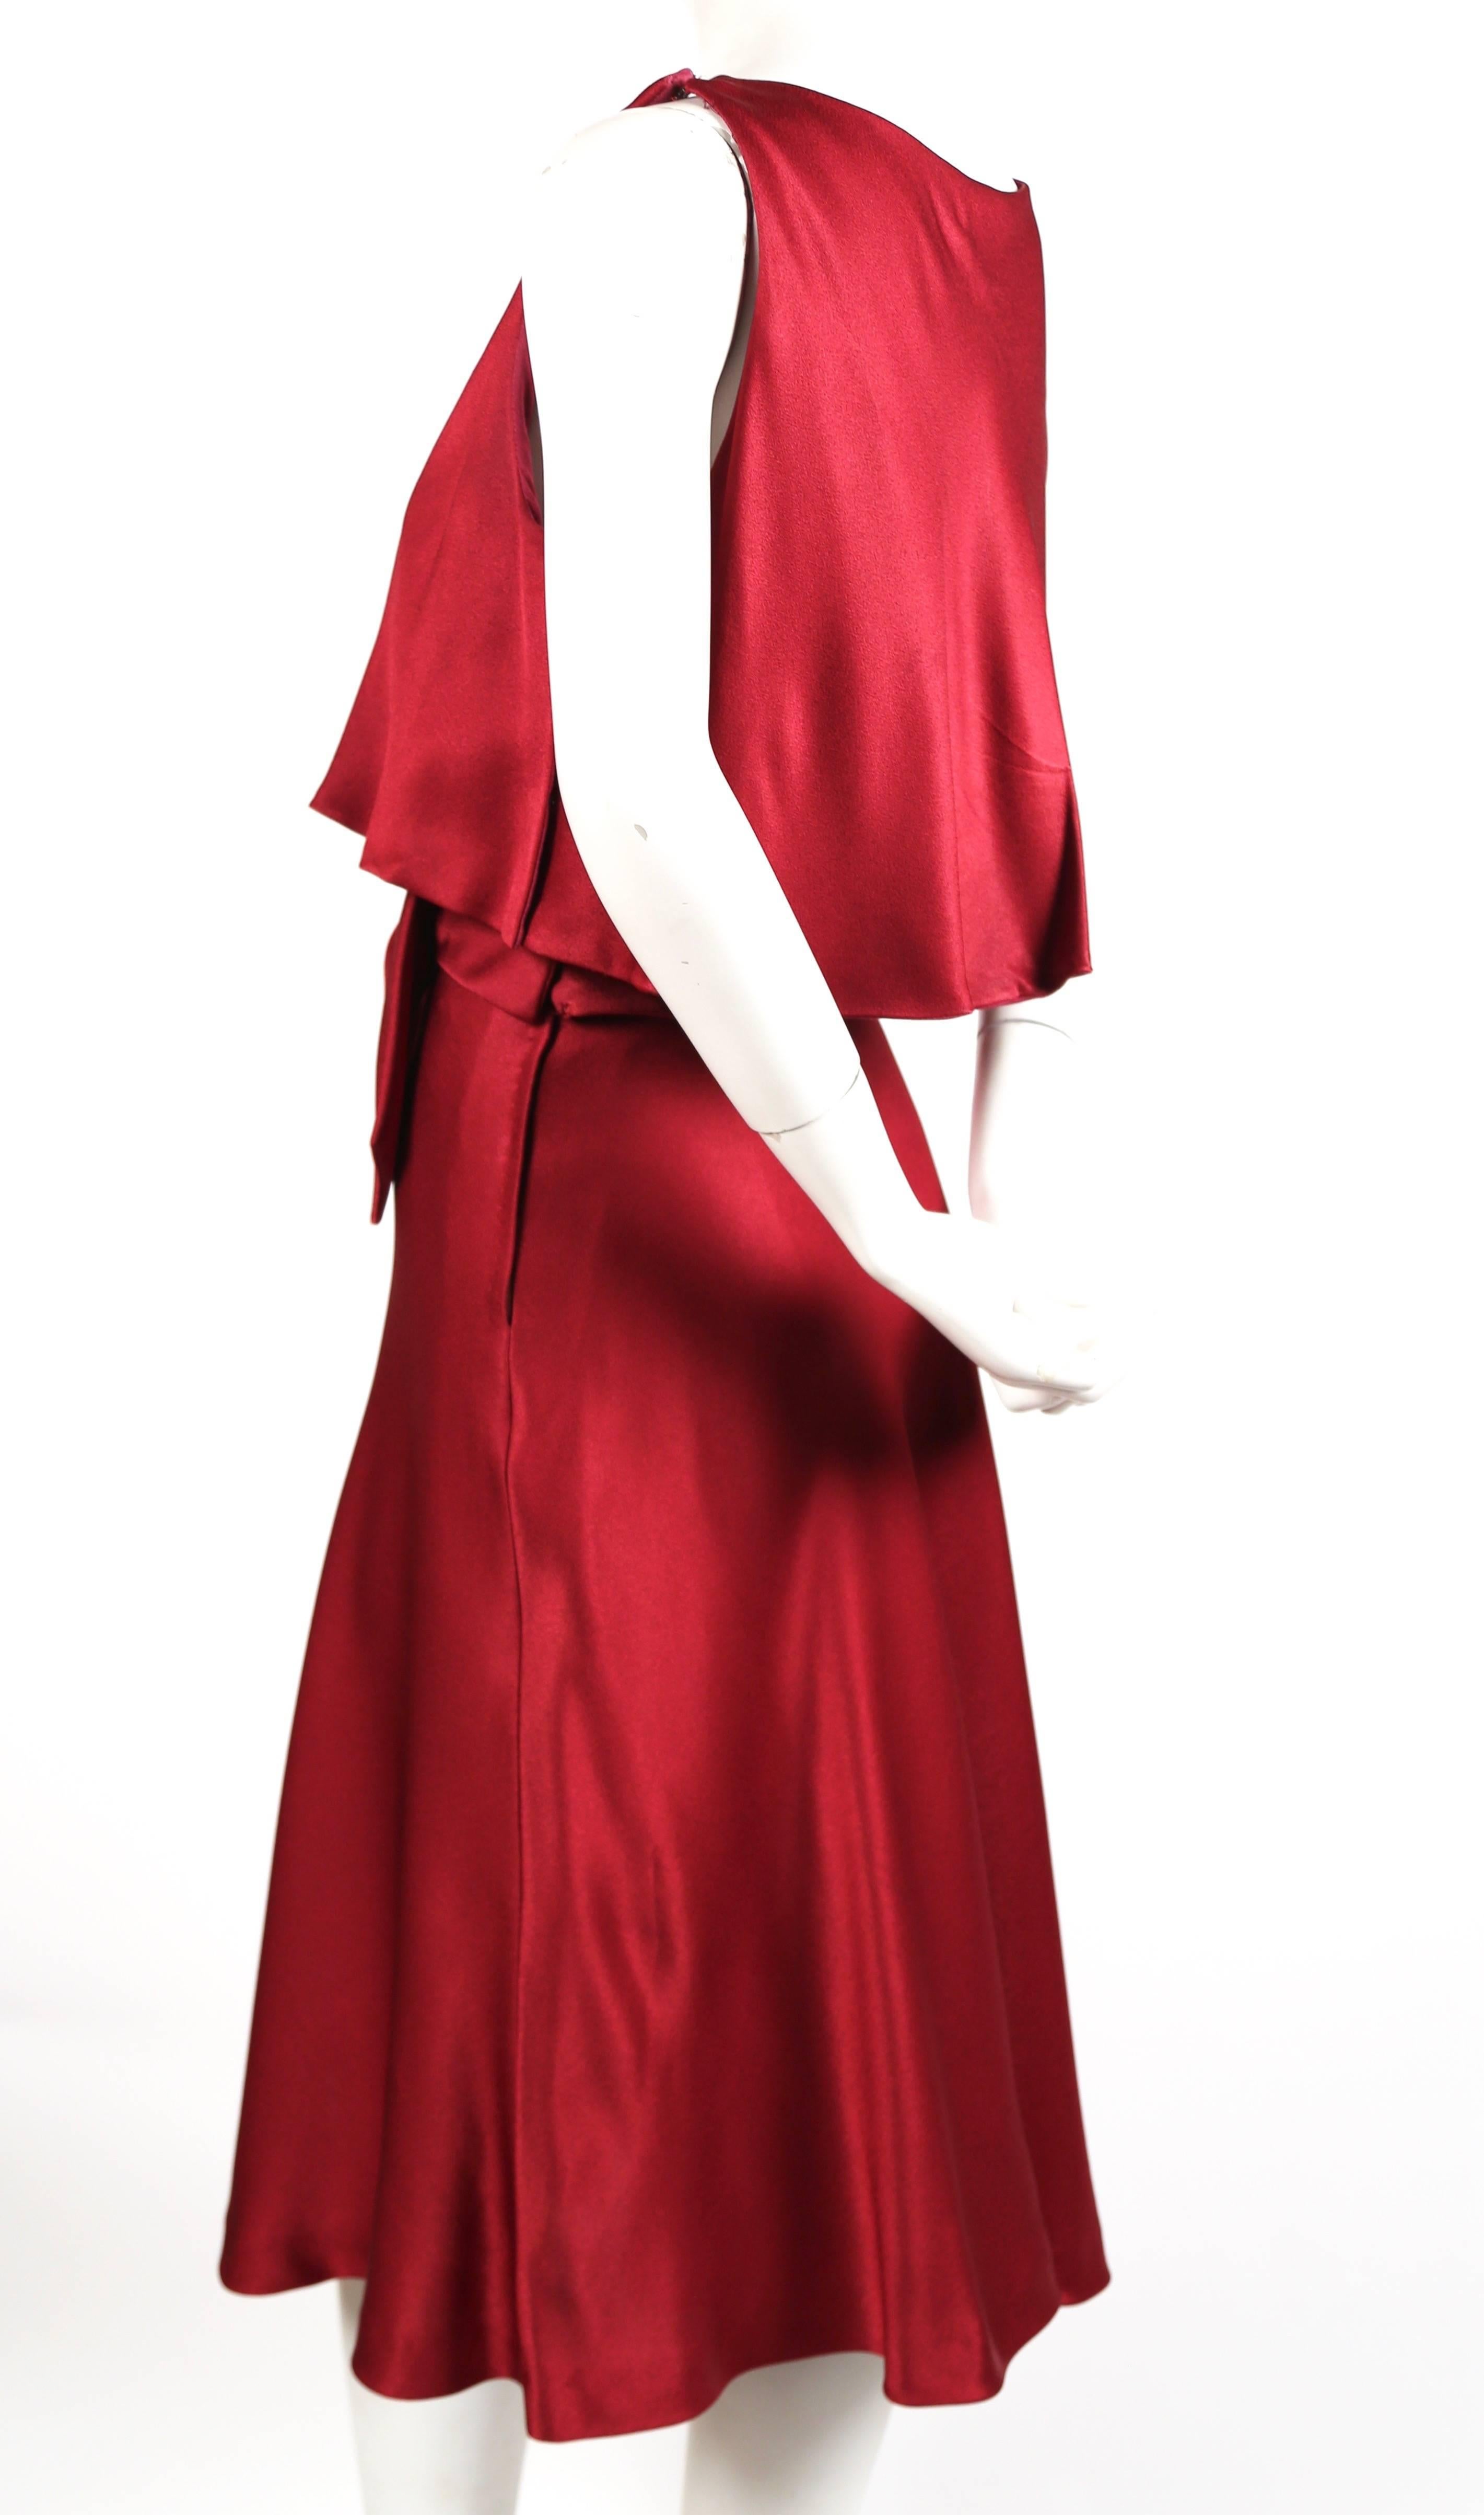 Vivid cranberry dress with crystal detail at waistline from Luis Estevez dating to the late 1960's. Top layer falls loosely over the bodice with a fitted under-layer and waistline. Bow detail with crystals. Dress best suited for a US 4 or 6.